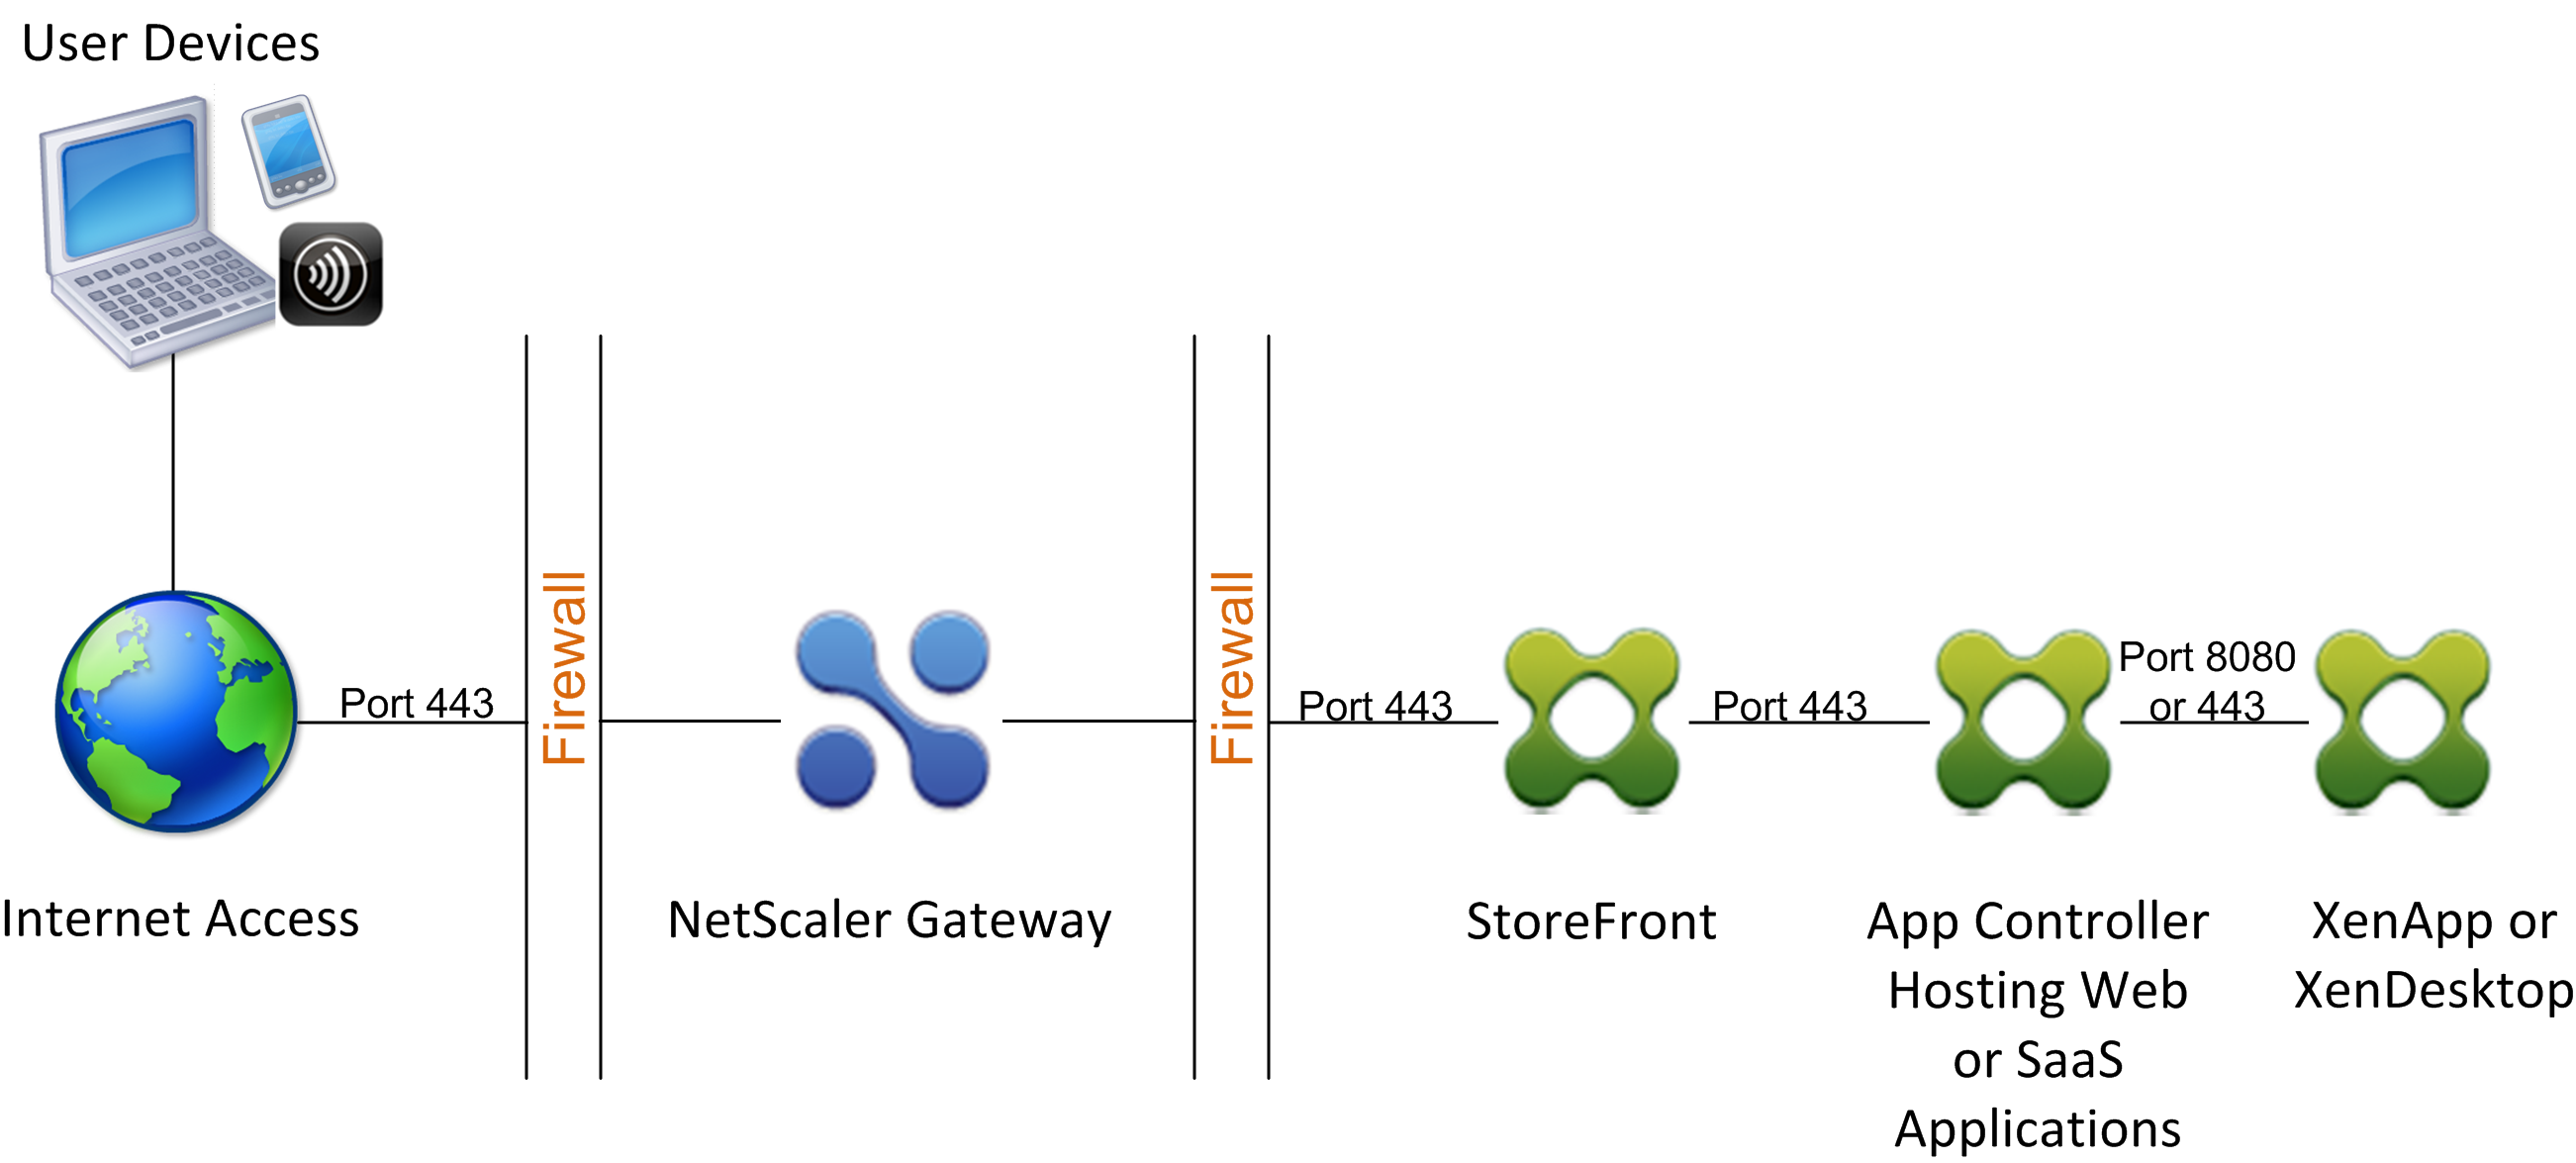 Deploying NetScaler Gateway with StoreFront in Front of Endpoint Management